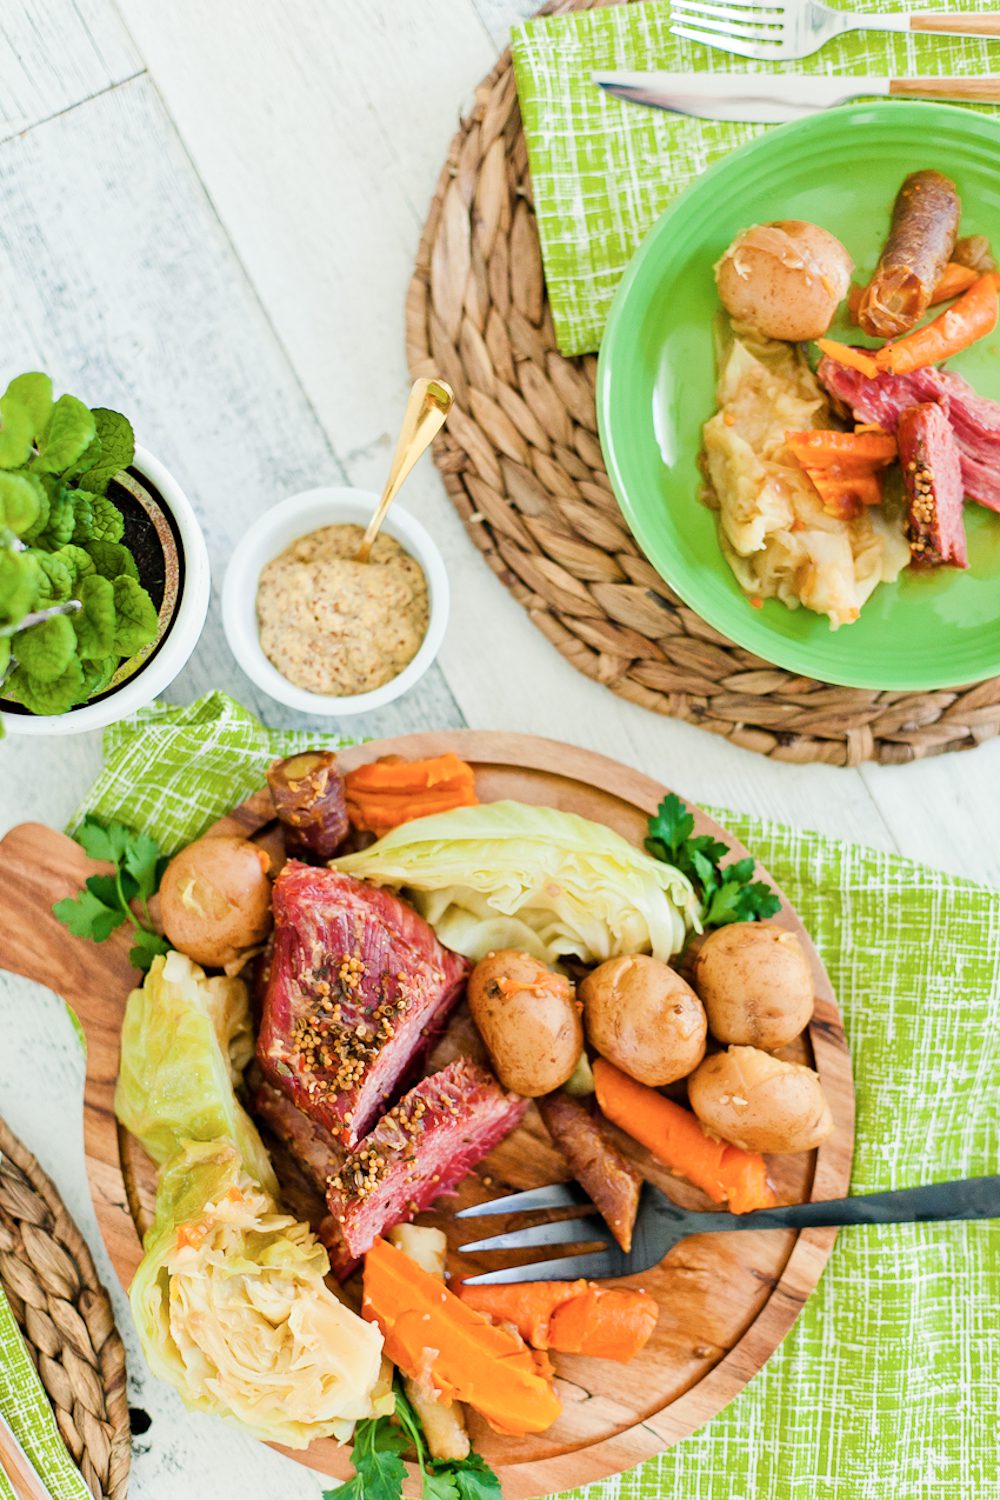 Tender Instant Pot Corned Beef and Cabbage in guinness recipe by popular lifestyle Florida blogger, Tabitha Blue of Fresh Mommy Blog! This tender, beer-infused Instant Pot Corned Beef and Cabbage is the perfect way to celebrate St. Patrick’s Day and is easy to cook in less time.